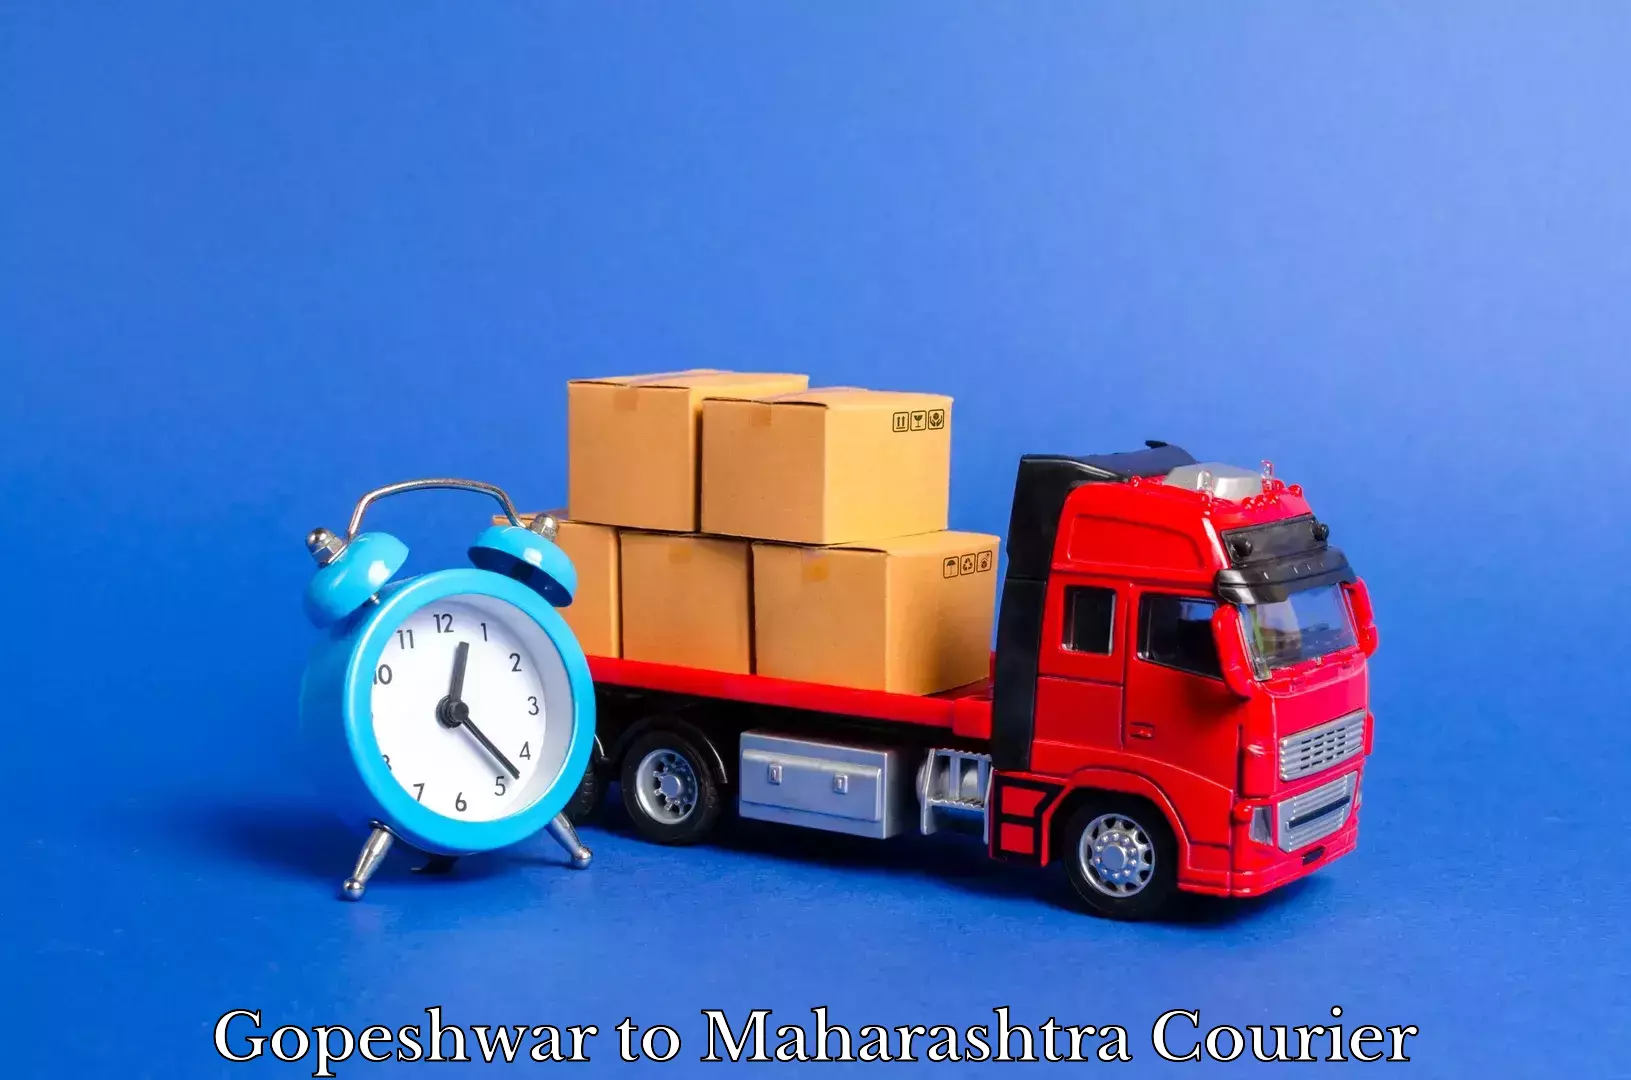 Professional relocation services Gopeshwar to Loni Ahmednagar